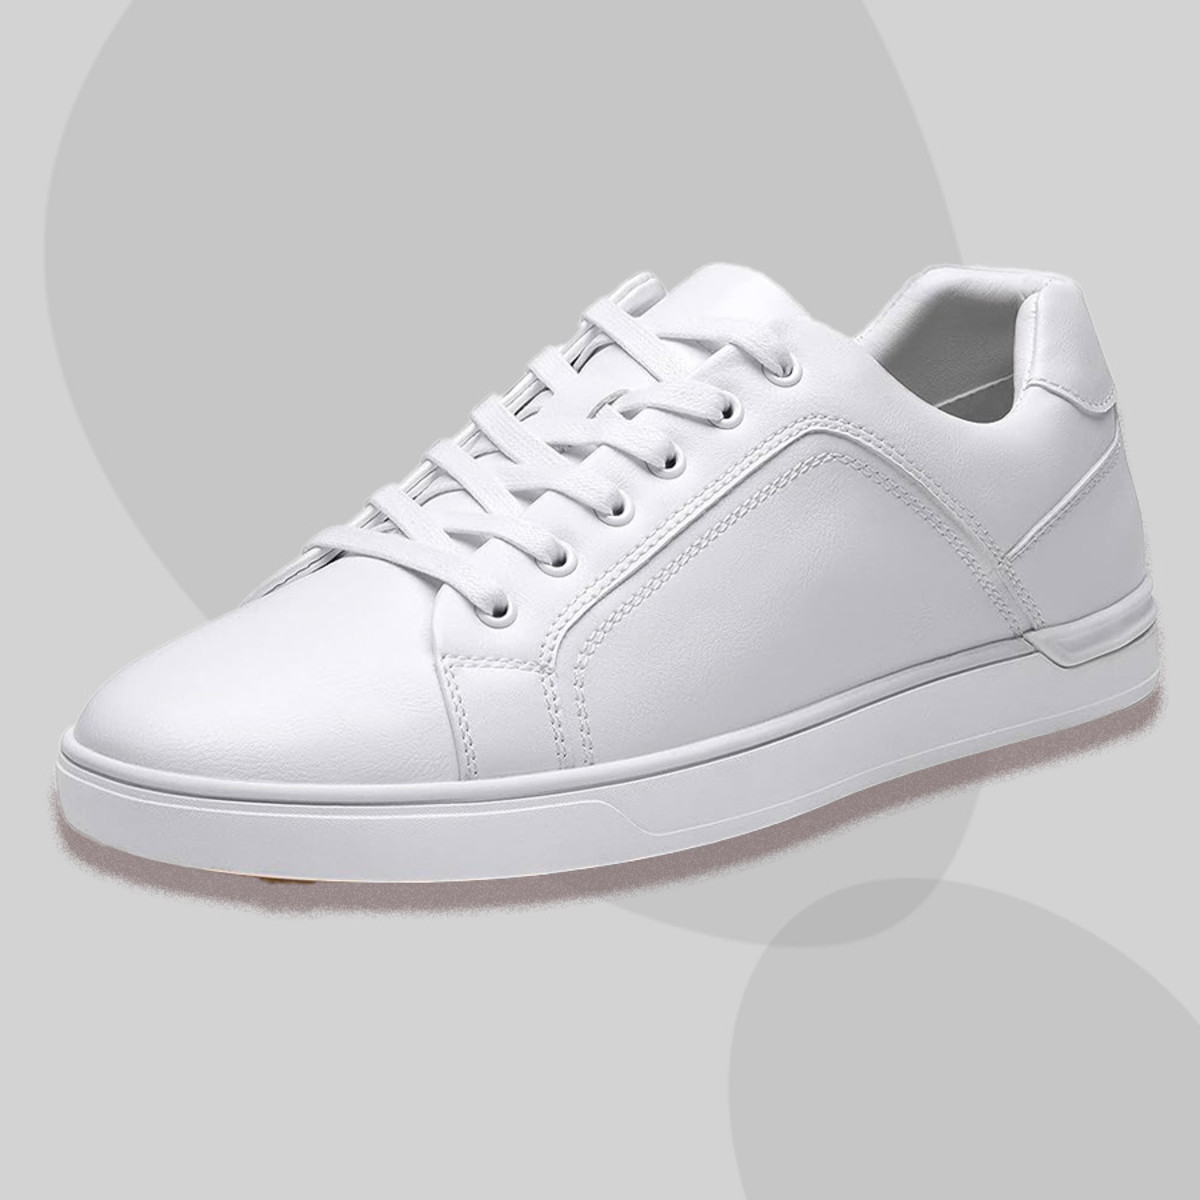 21 Best White Sneakers & Shoes For Men in 2023: Leather, Canvas